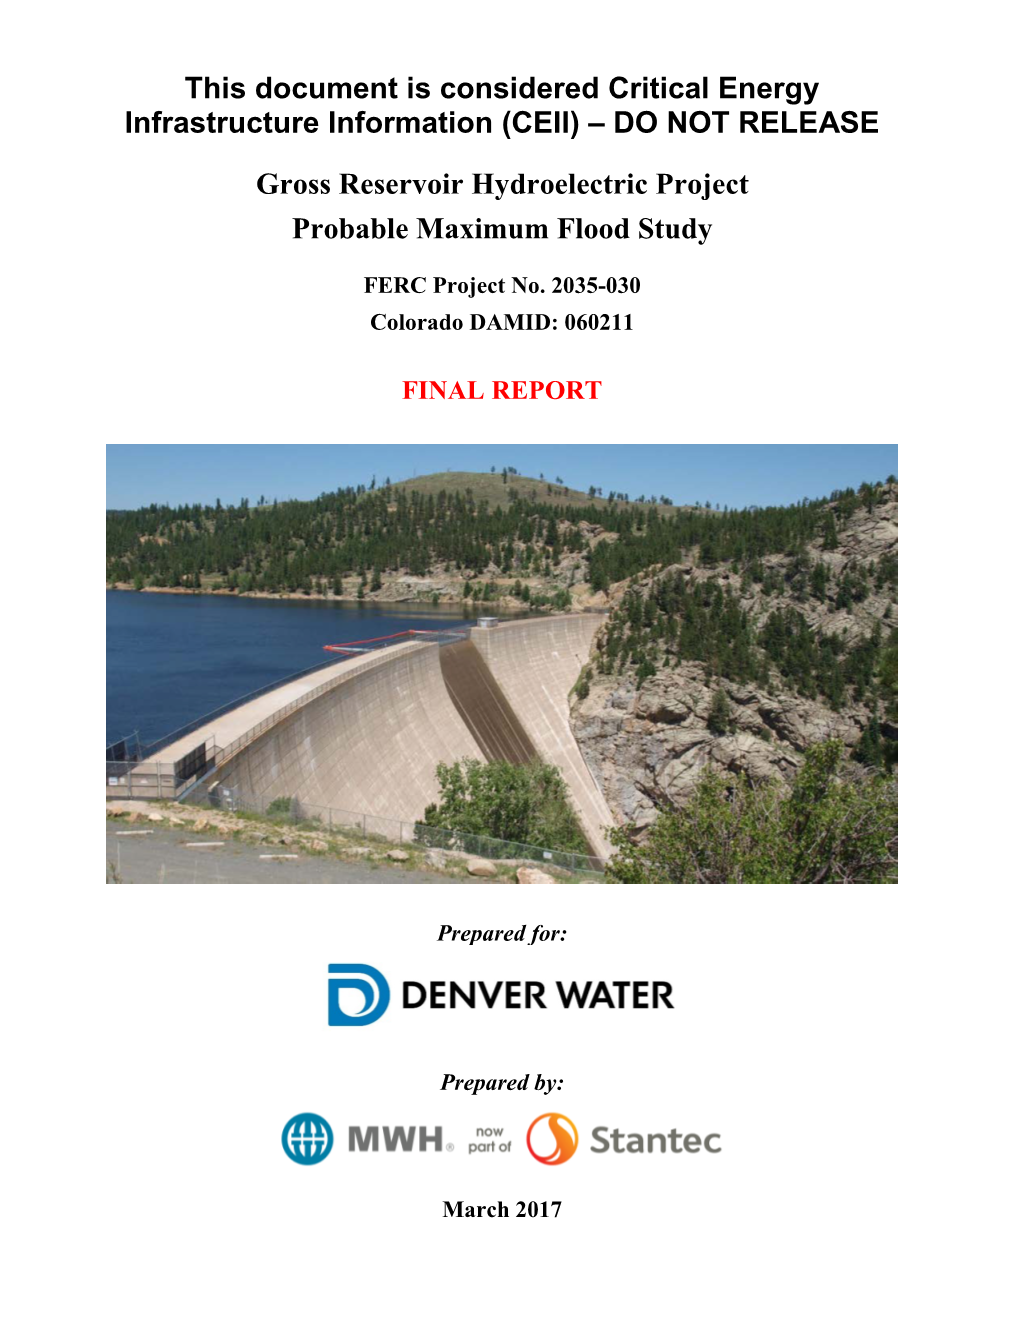 Do Not Release Gross Reservoir Hydroelectric Project Probable Maximum Flood Study